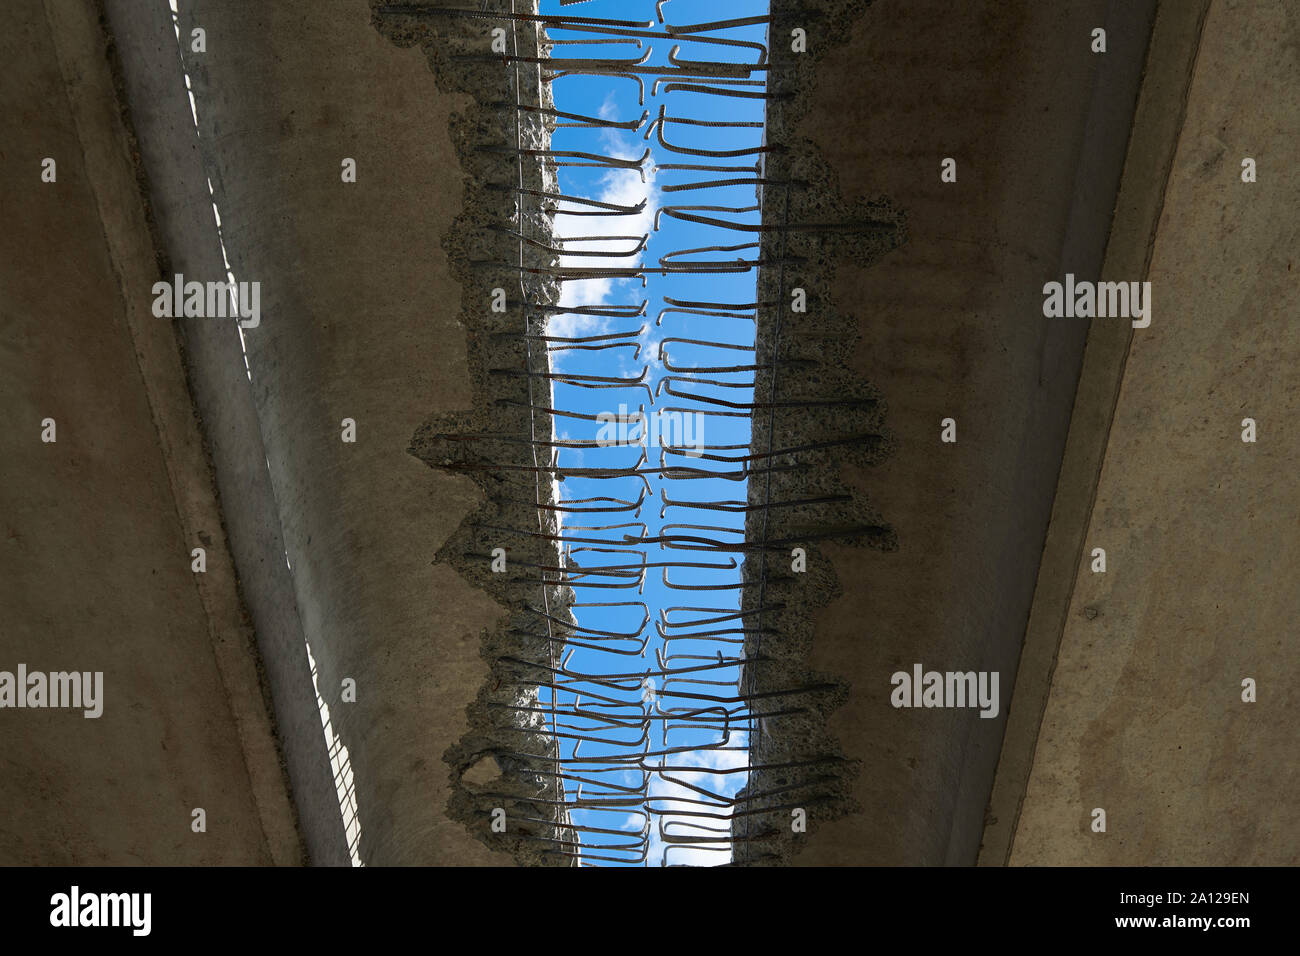 Under the bridge. Hole with a blue sky view. Abstract construction background. Metal rods in concrete. Old object under reconstruction. Stock Photo